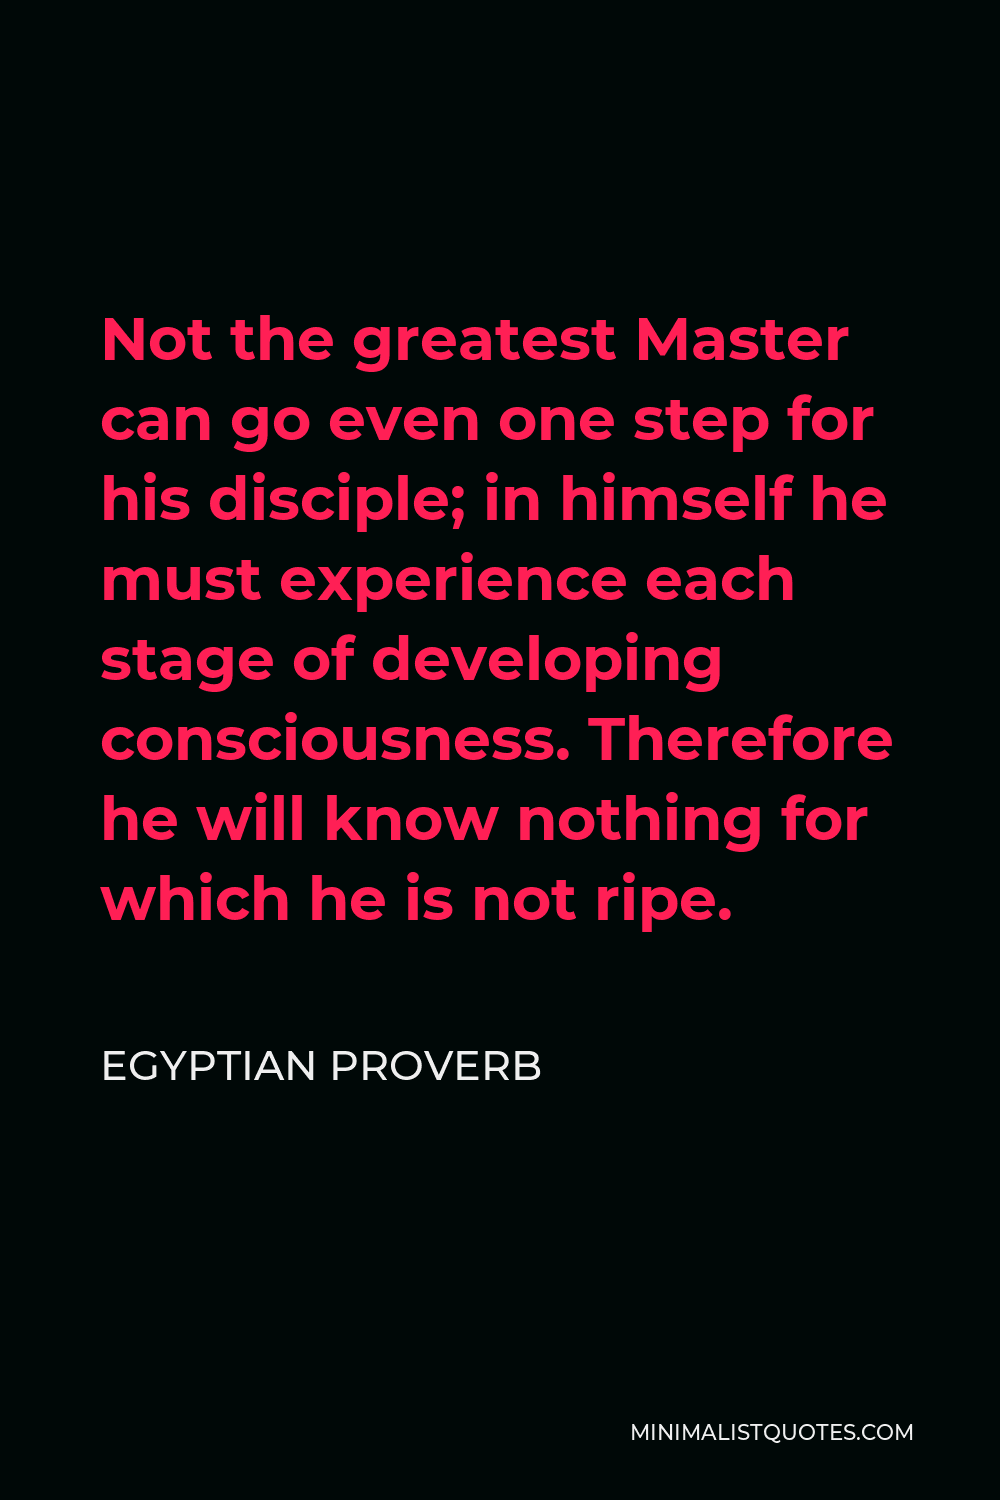 Egyptian Proverb Quote - Not the greatest Master can go even one step for his disciple; in himself he must experience each stage of developing consciousness. Therefore he will know nothing for which he is not ripe.